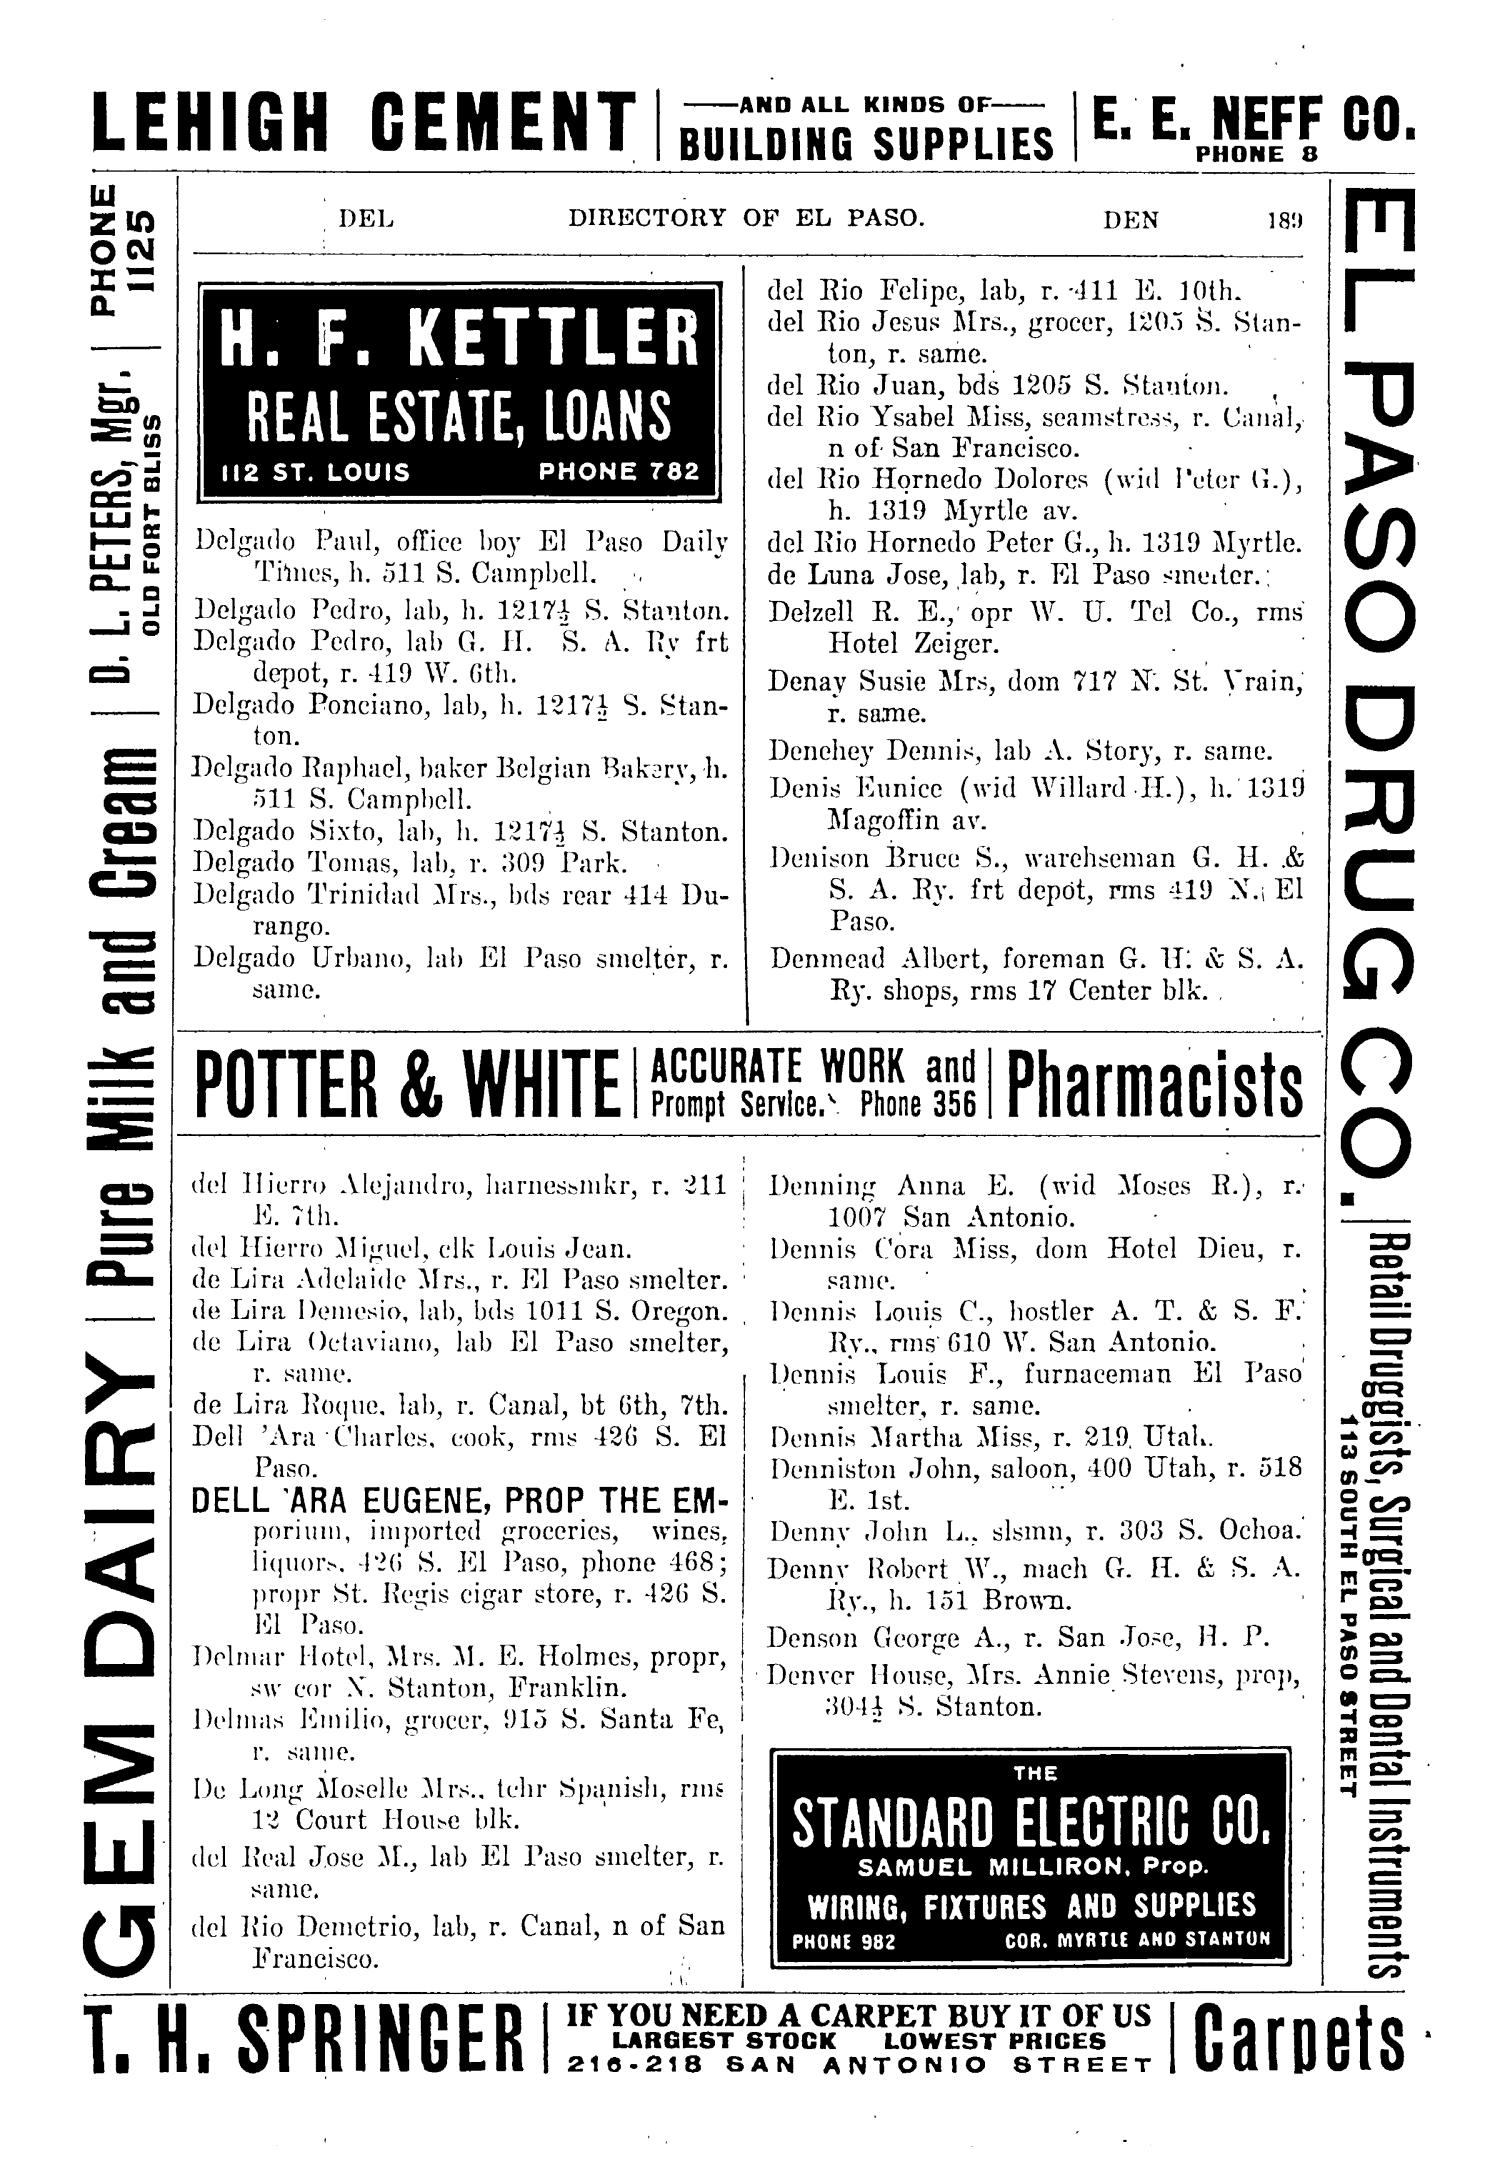 John F. Worley & Co.'s El Paso Directory for 1906
                                                
                                                    189
                                                